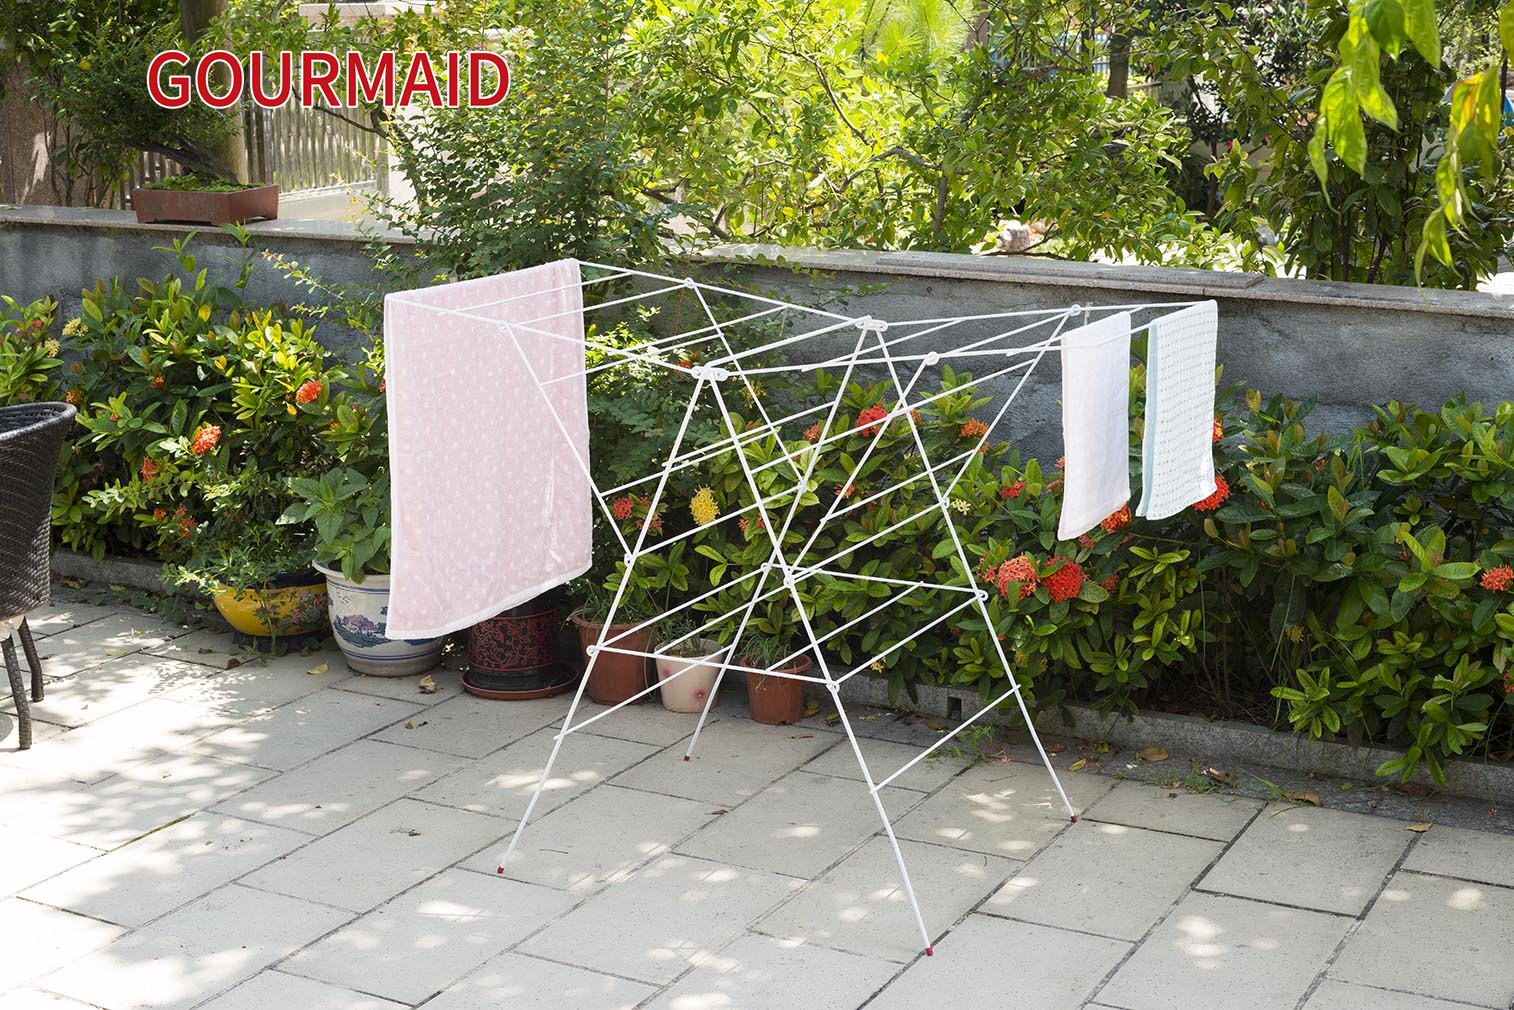 Special Design for Slim Laundry Hamper - Winged Indoor Clothes Airer – Light Houseware